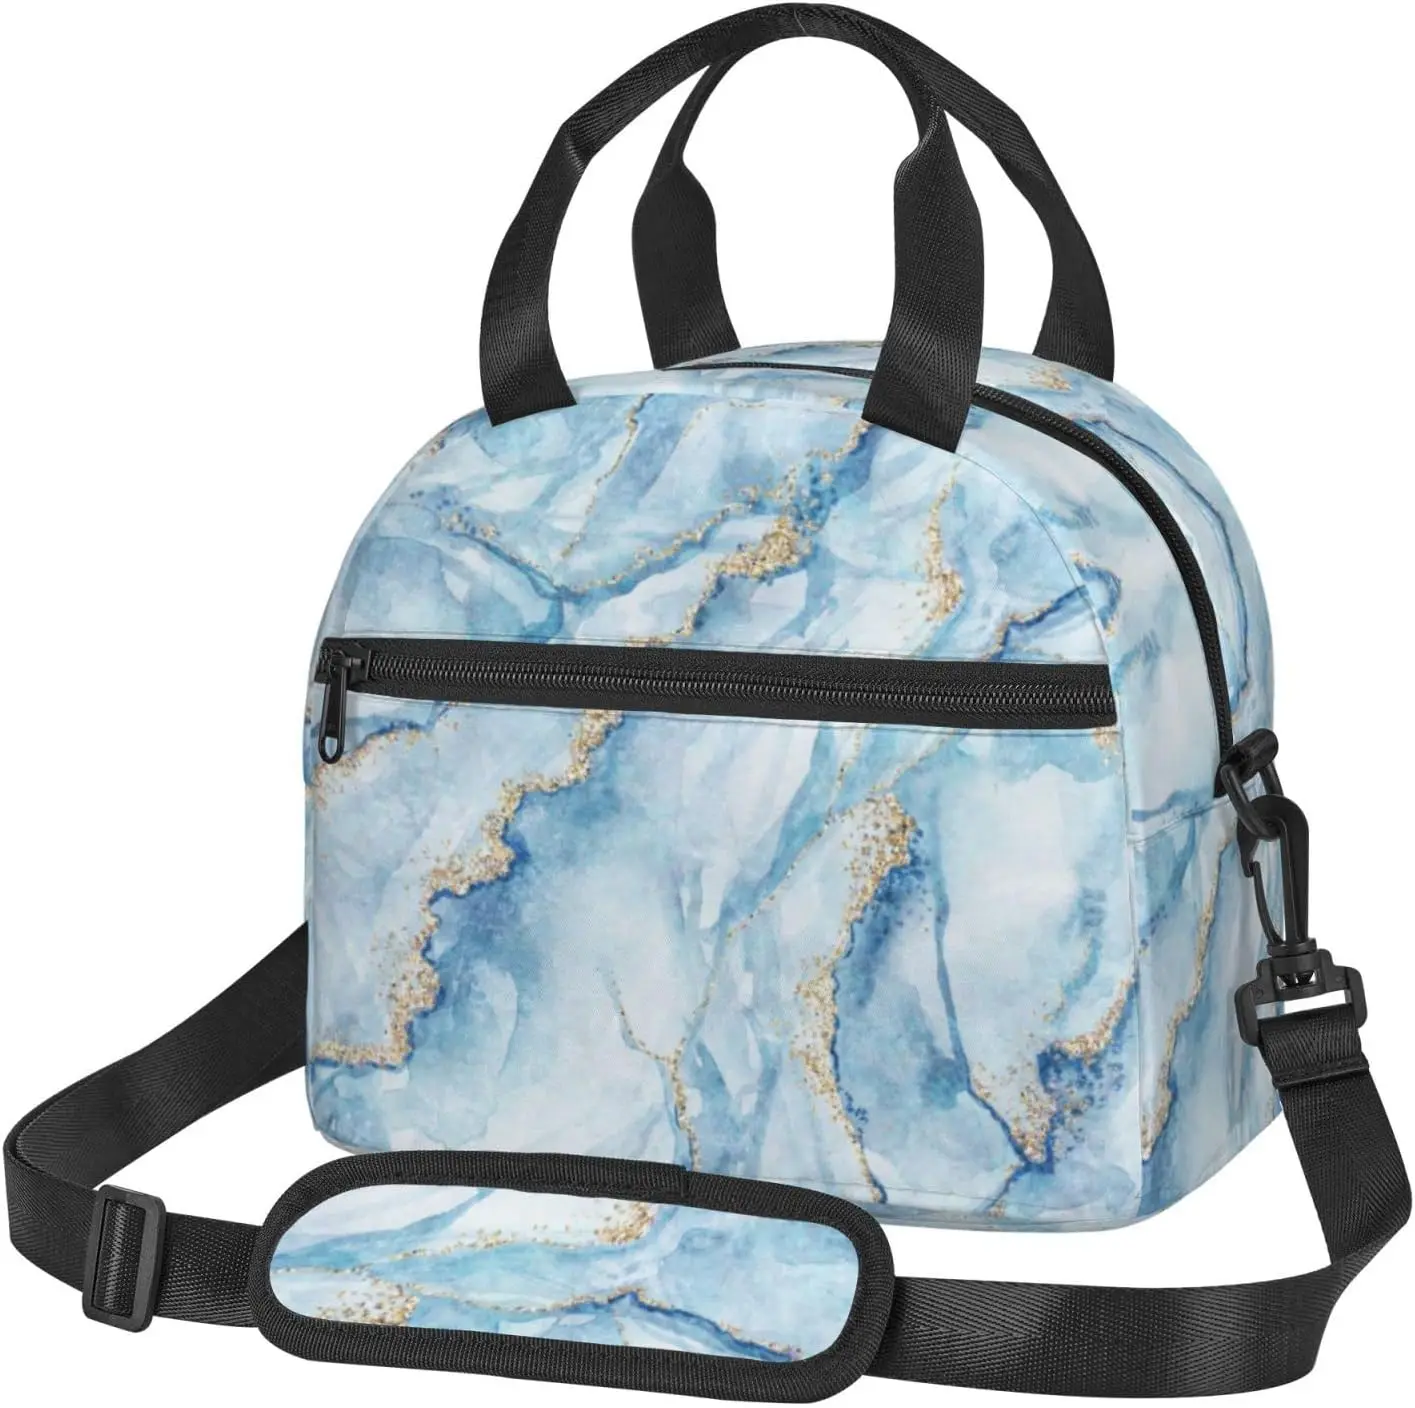 

Blue Marble With Gold Glitter Marbling Texture Lunch Bag Reusable Insulated Lunch Tote Bag Lunchbox Container With Adjustable